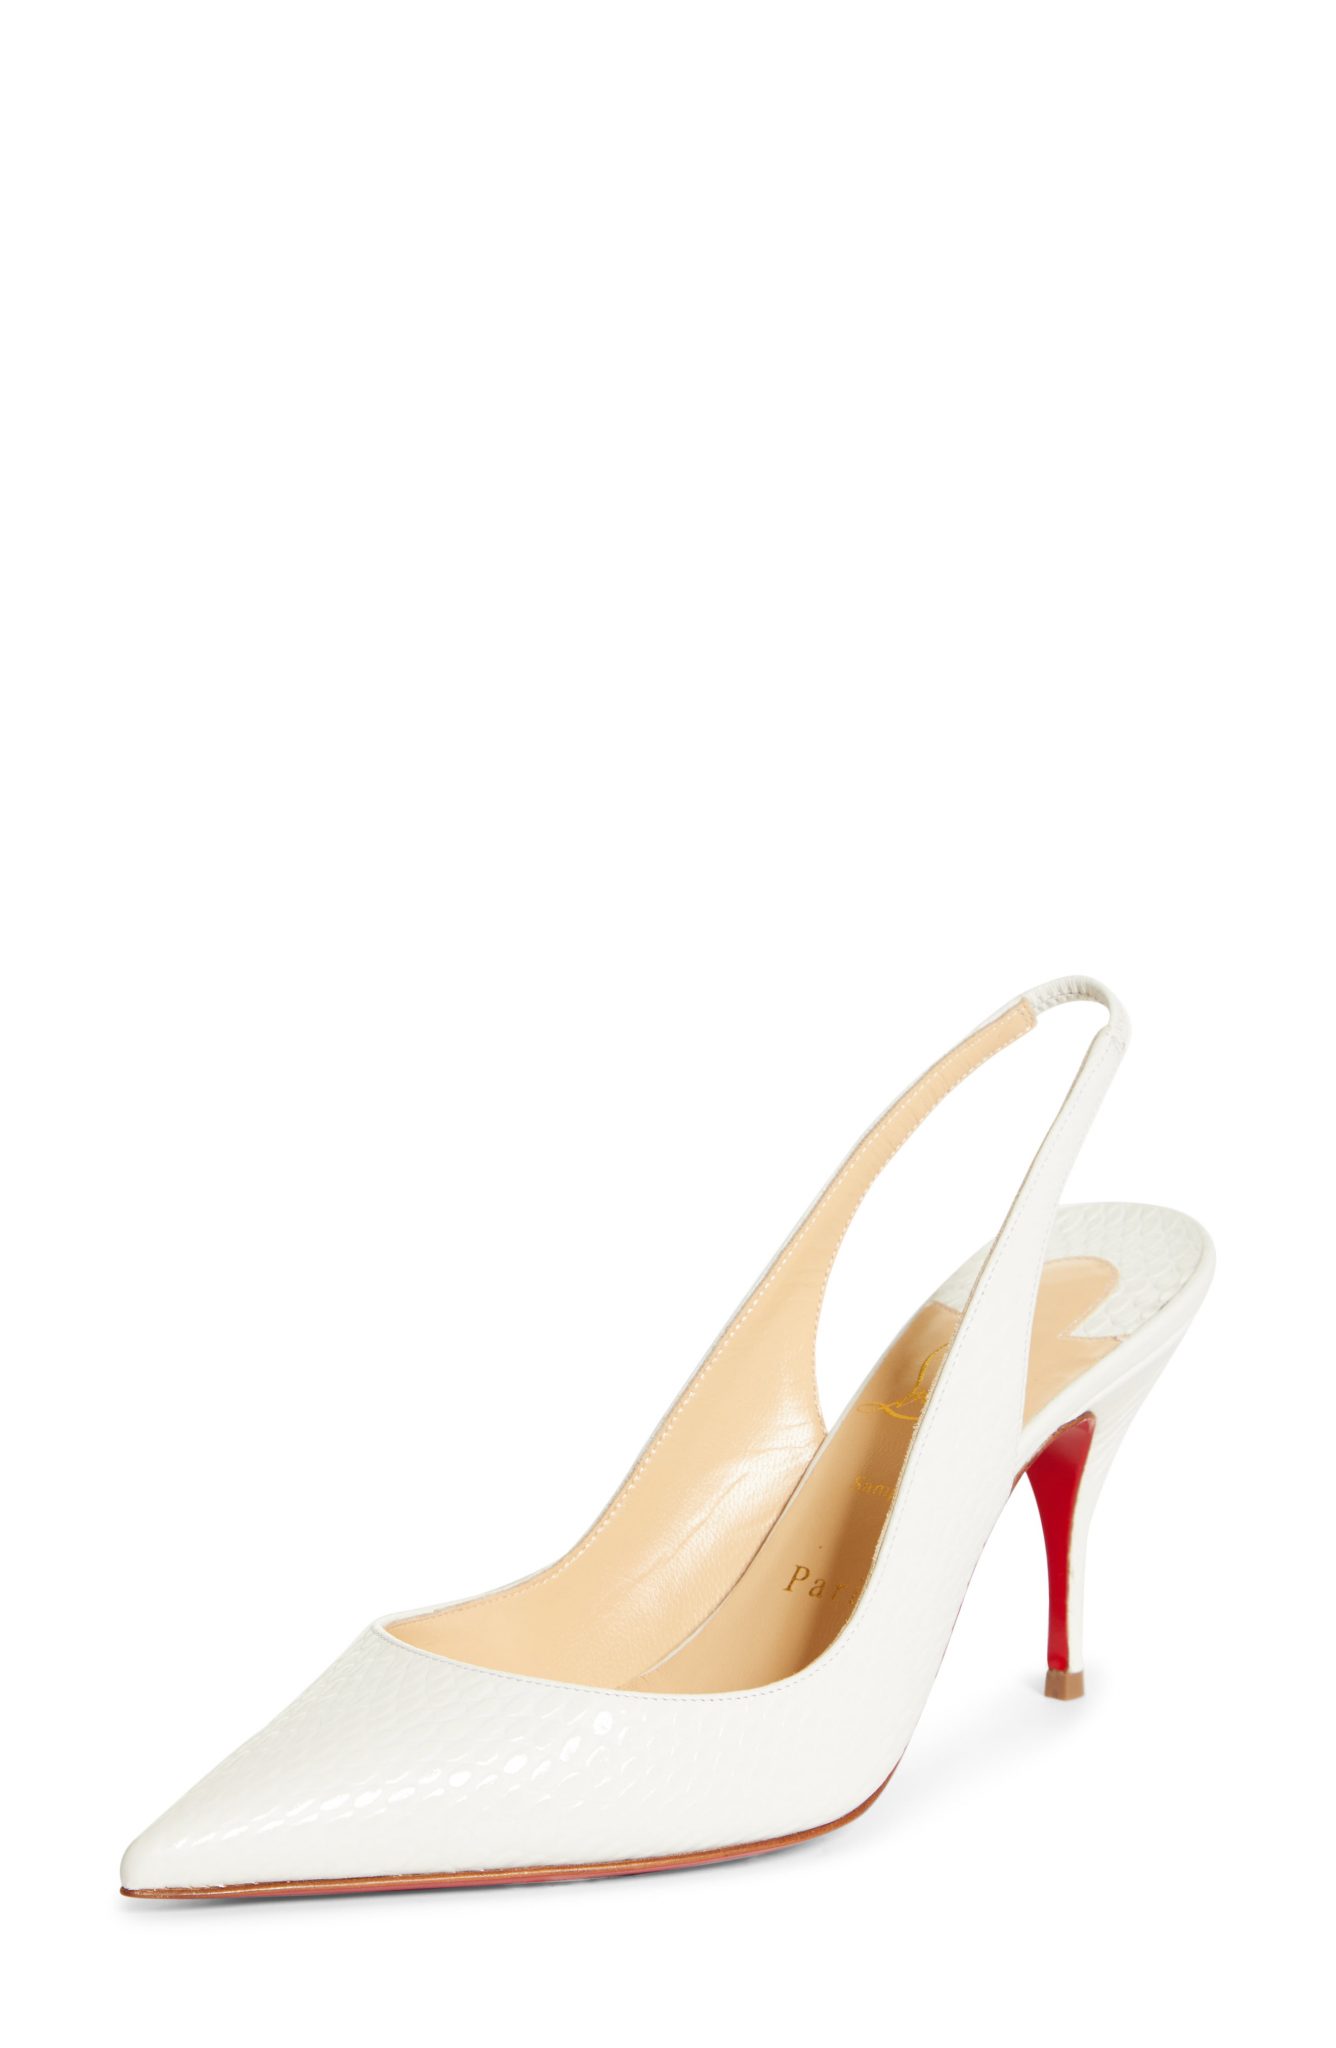 Women’s Christian Louboutin Clare Pointed Toe Slingback Pump, Size 11US ...